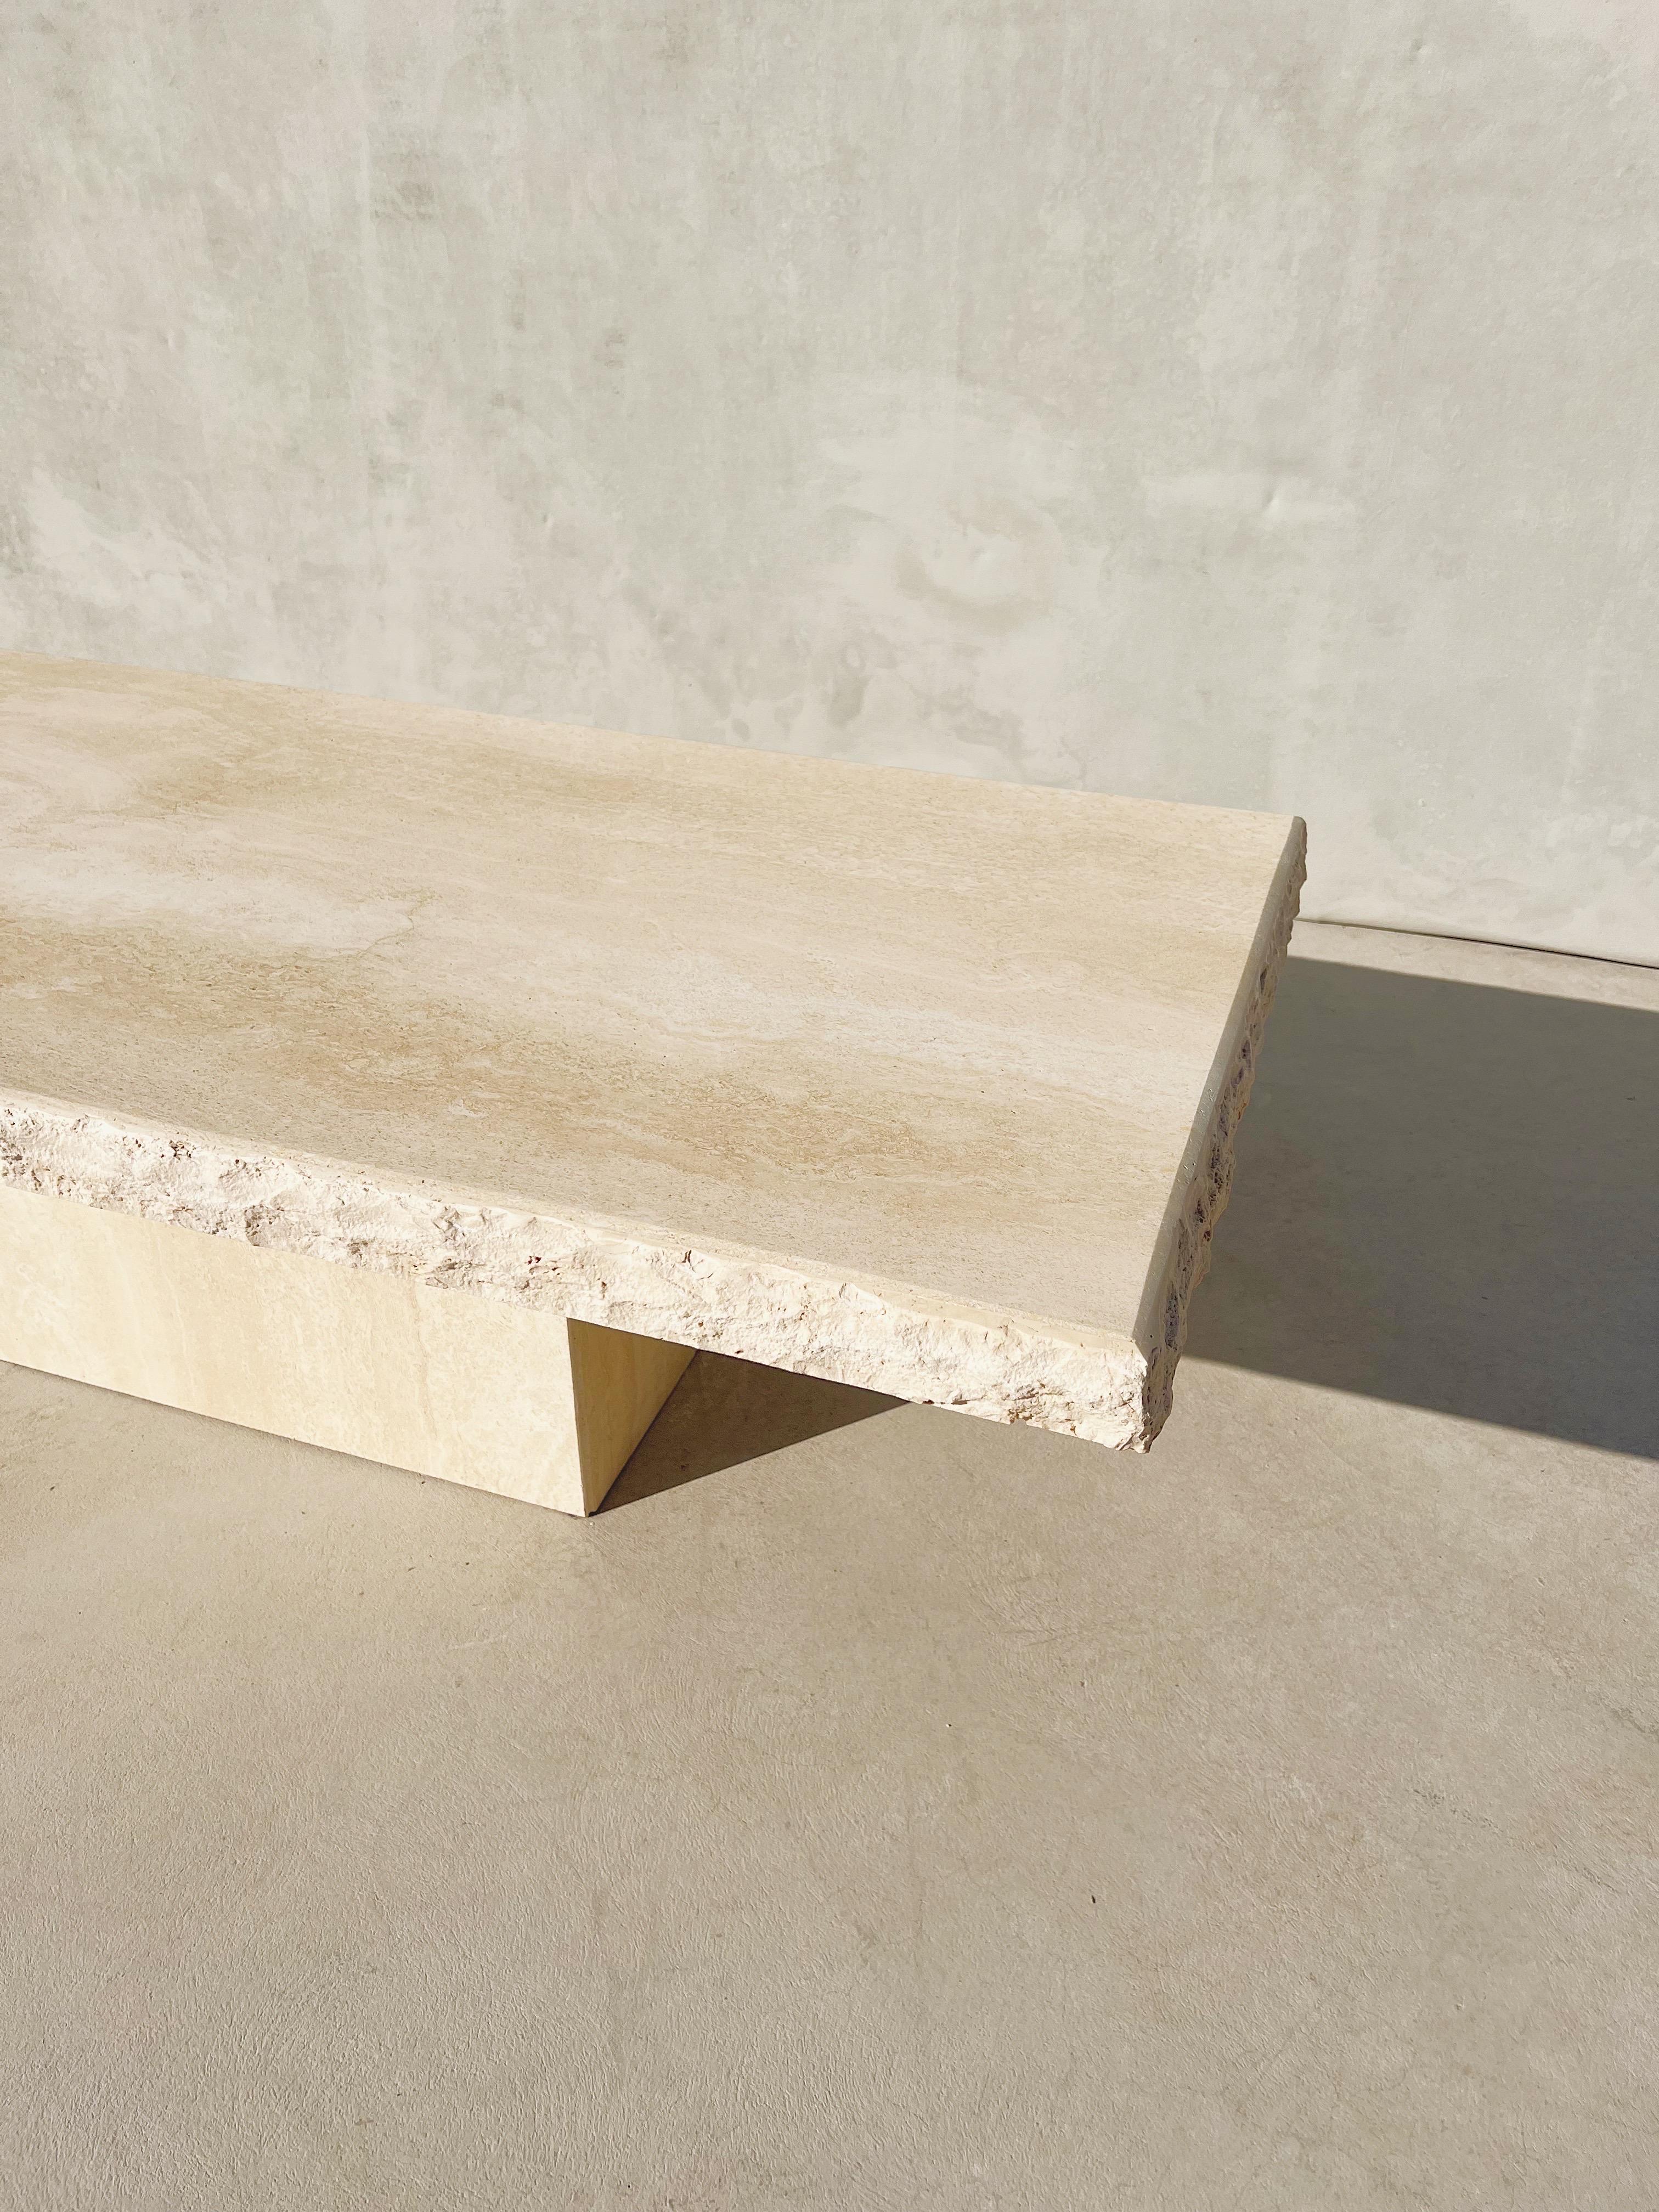 Vintage Italian Travertine Rectangular Coffee Table With Live Edges

A vintage Italian travertine coffee table, showcasing a polished base and a smooth, freshly polished and newly sealed top accented with textured live edges  

Milky, wavy, textured